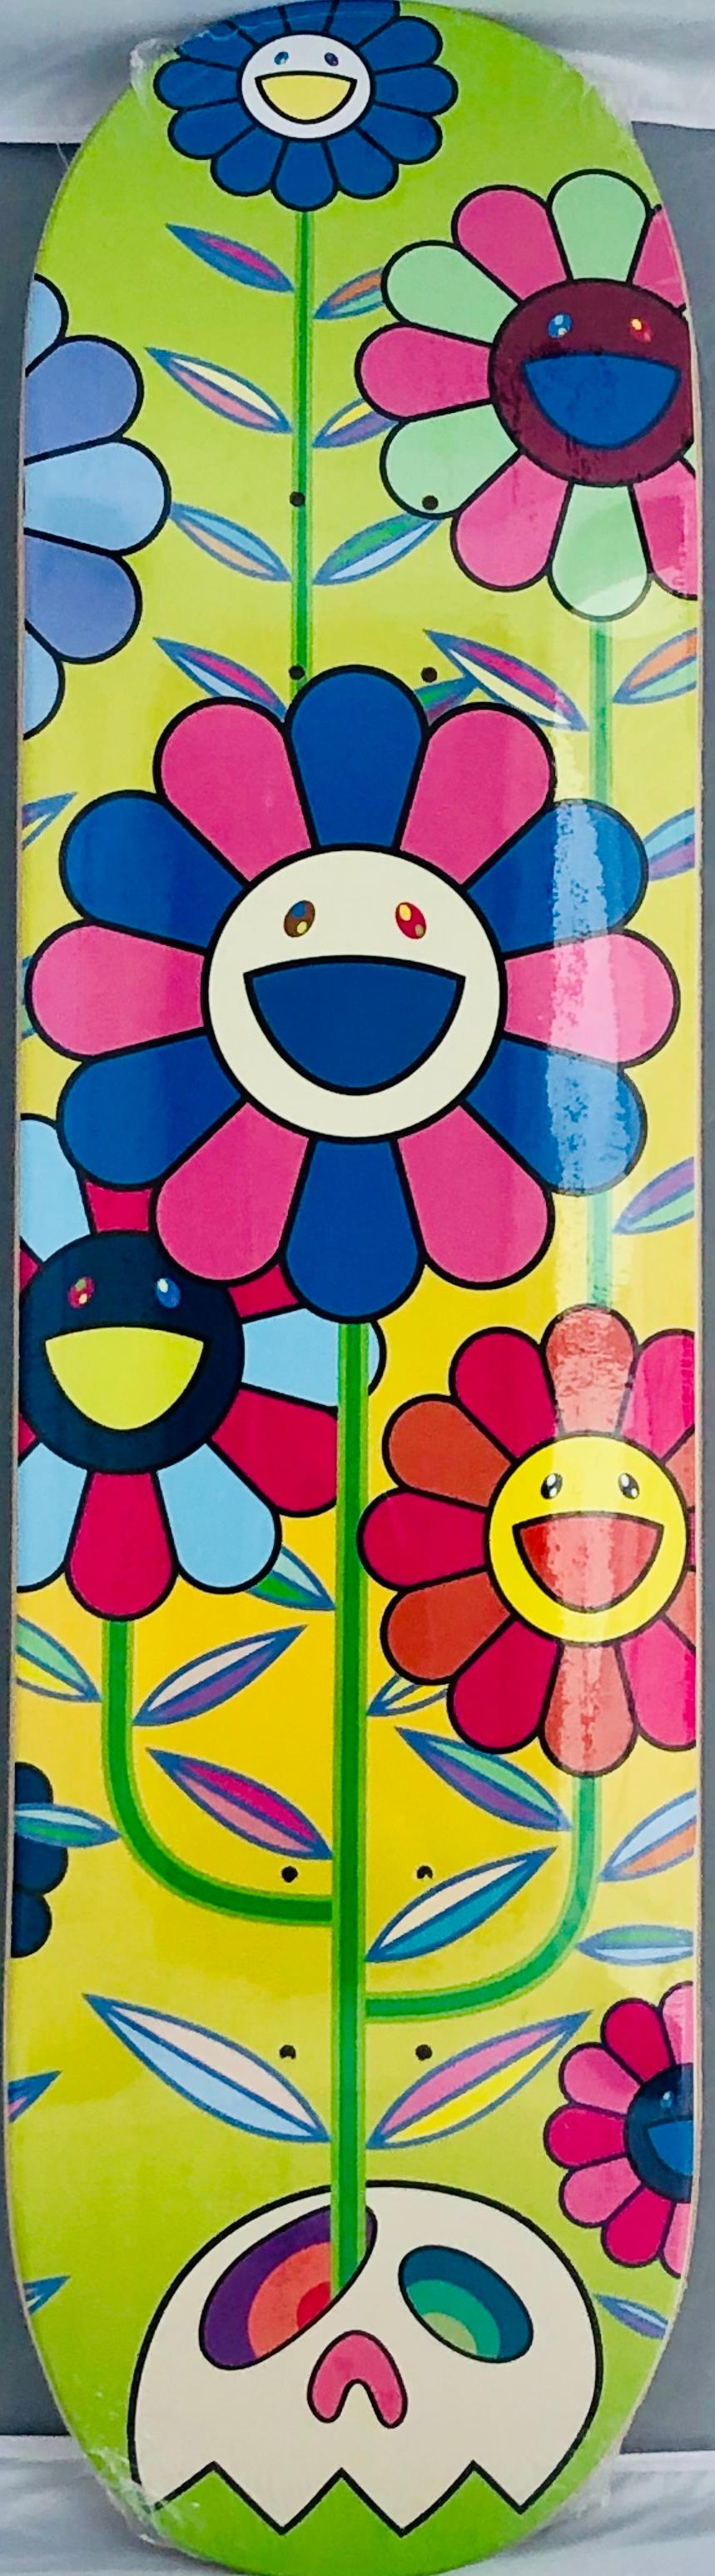 Takashi Murakami Flowers Skate Deck:
A vibrant piece of Takashi Murakami wall art produced as a completely sold out, limited series in 2019 in conjunction with Complexcon and Kaikai Kiki co. This deck is new in its original packaging. A brilliant